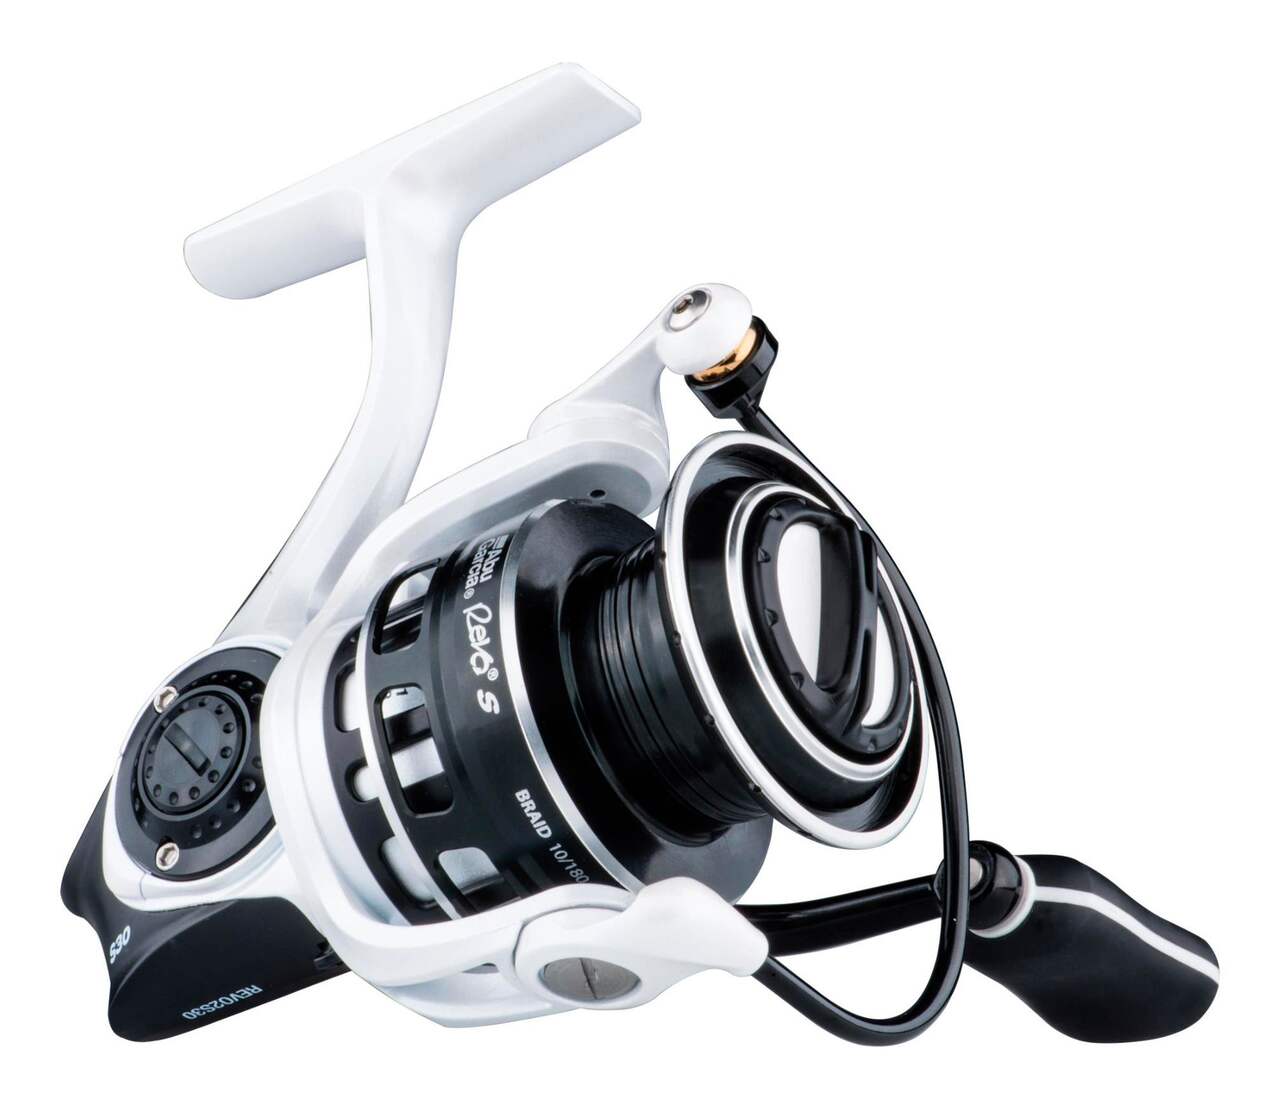 Abu Garcia Revo S Spinning Fishing Reel, Right and Left Hand, Assorted  Sizes